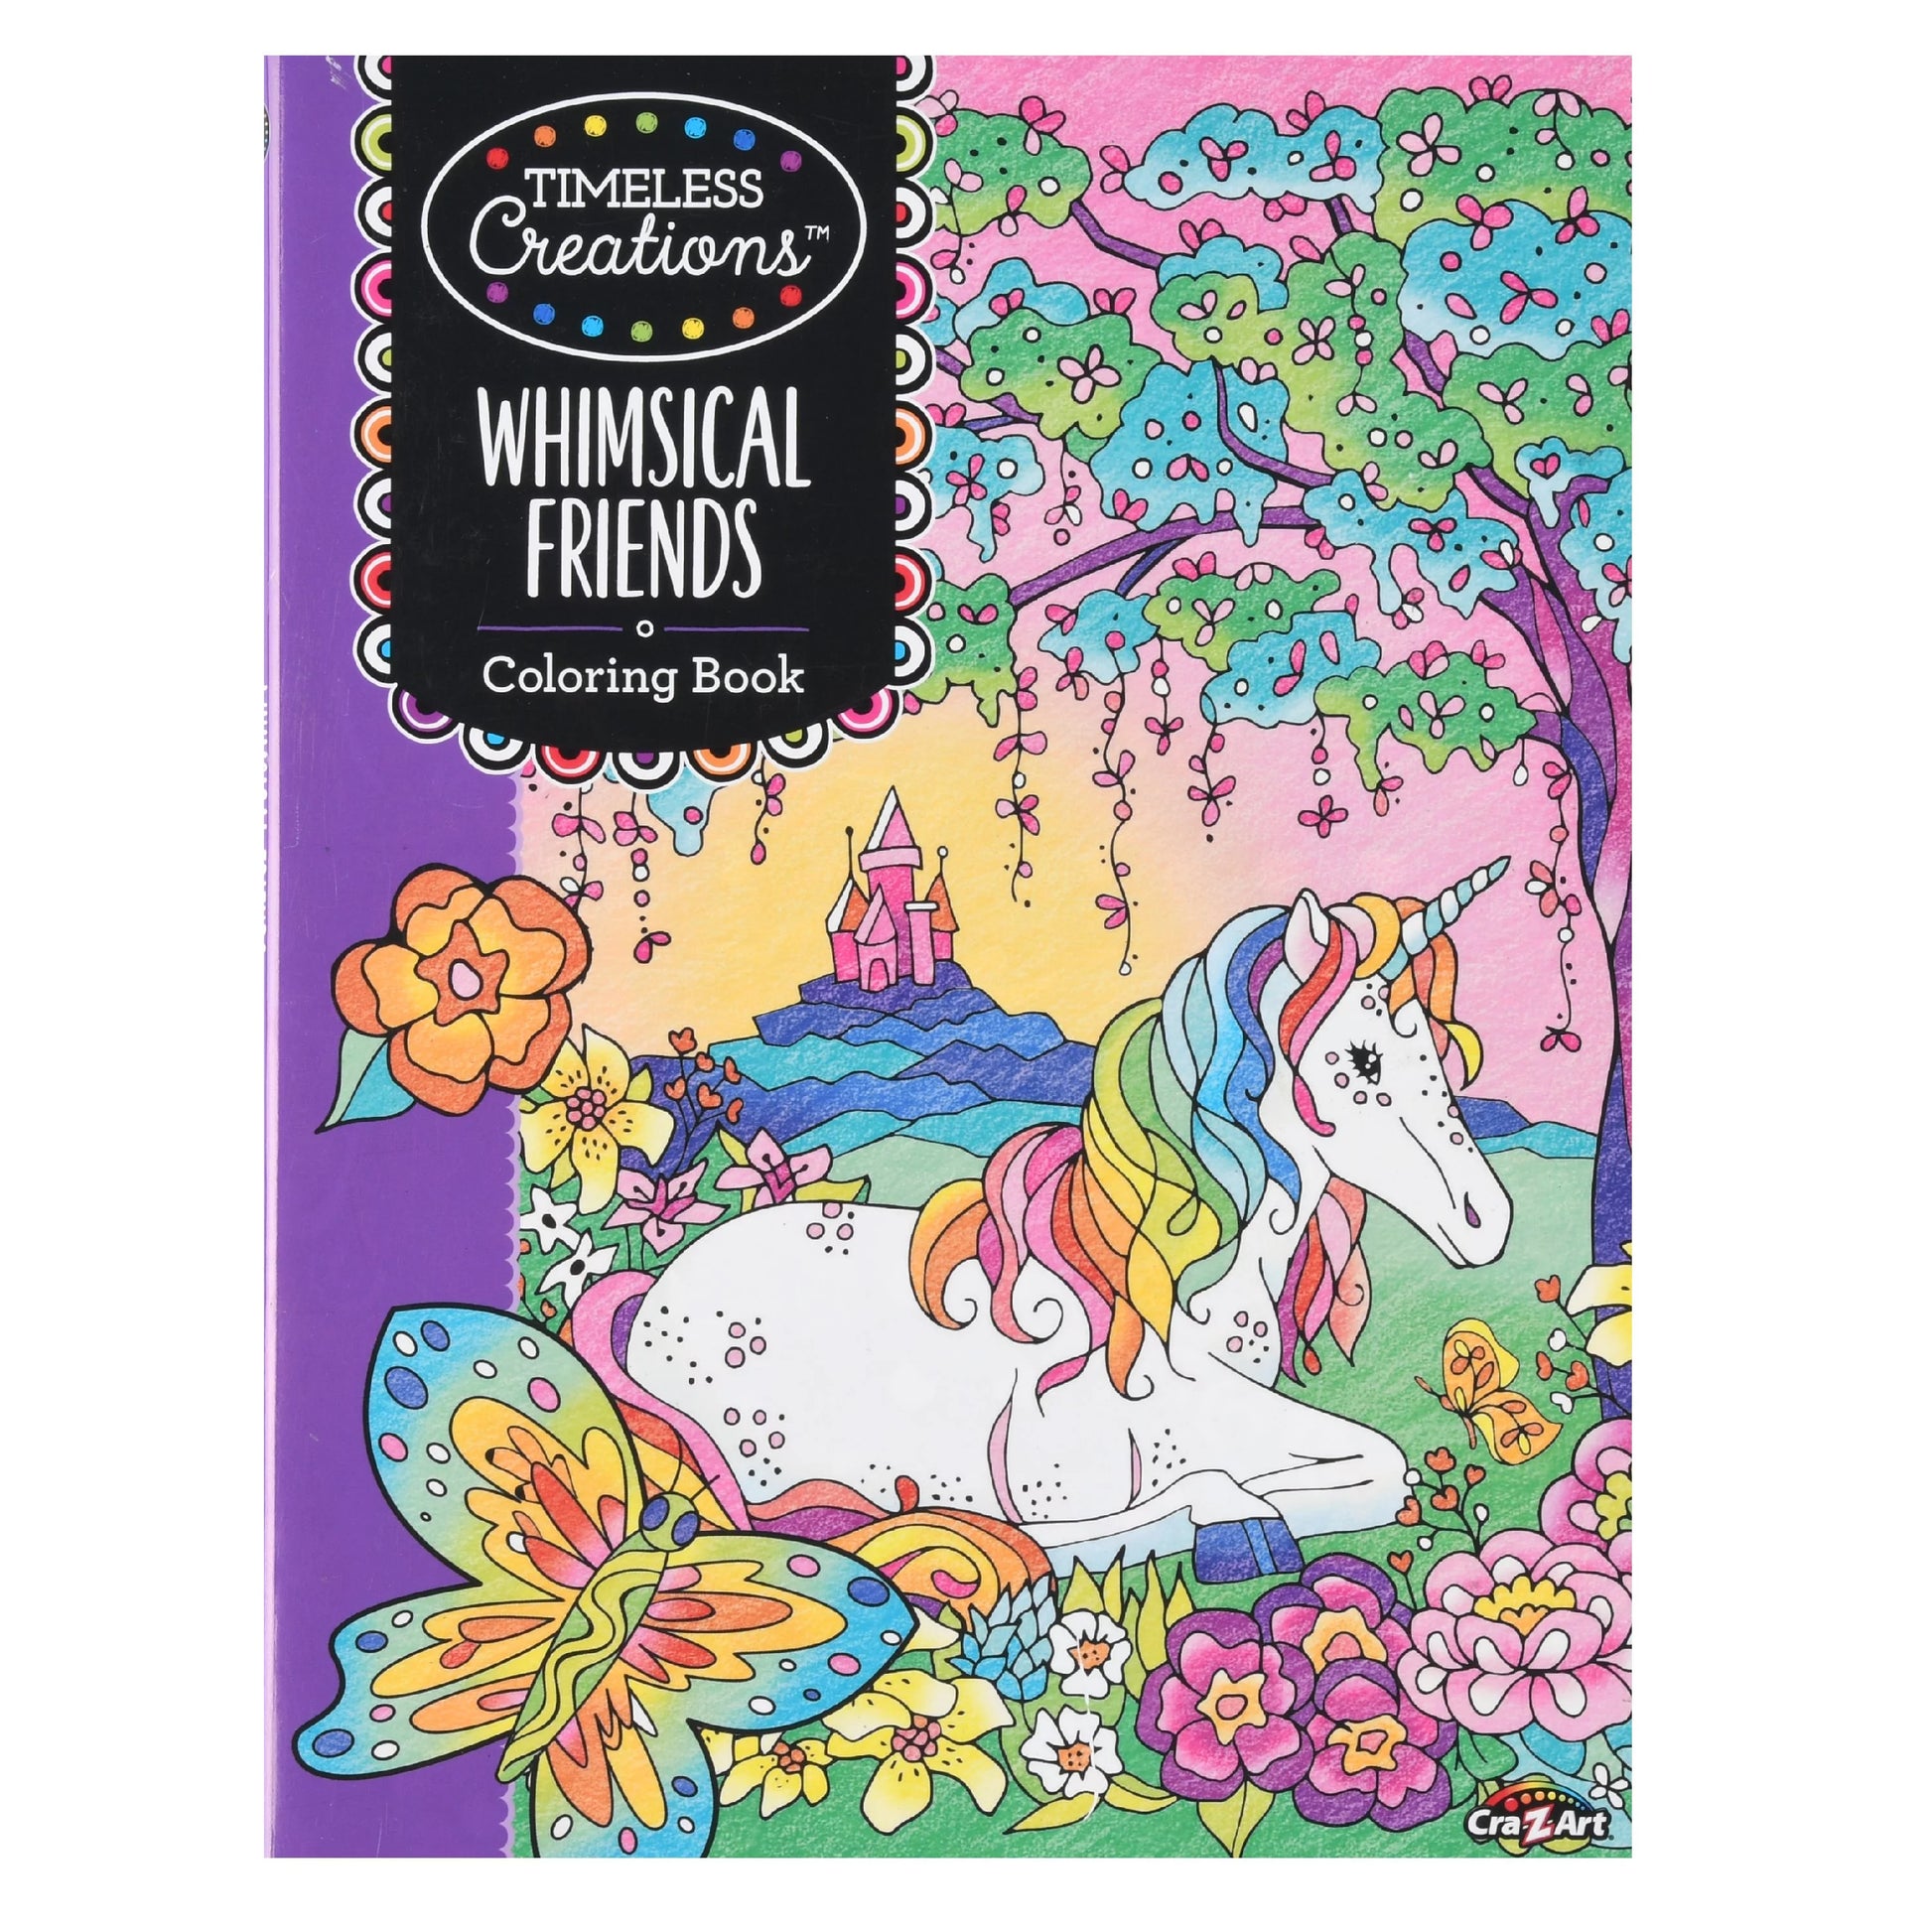 Cra-Z-Art Timeless Creations Coloring Book, Whimsical Friends